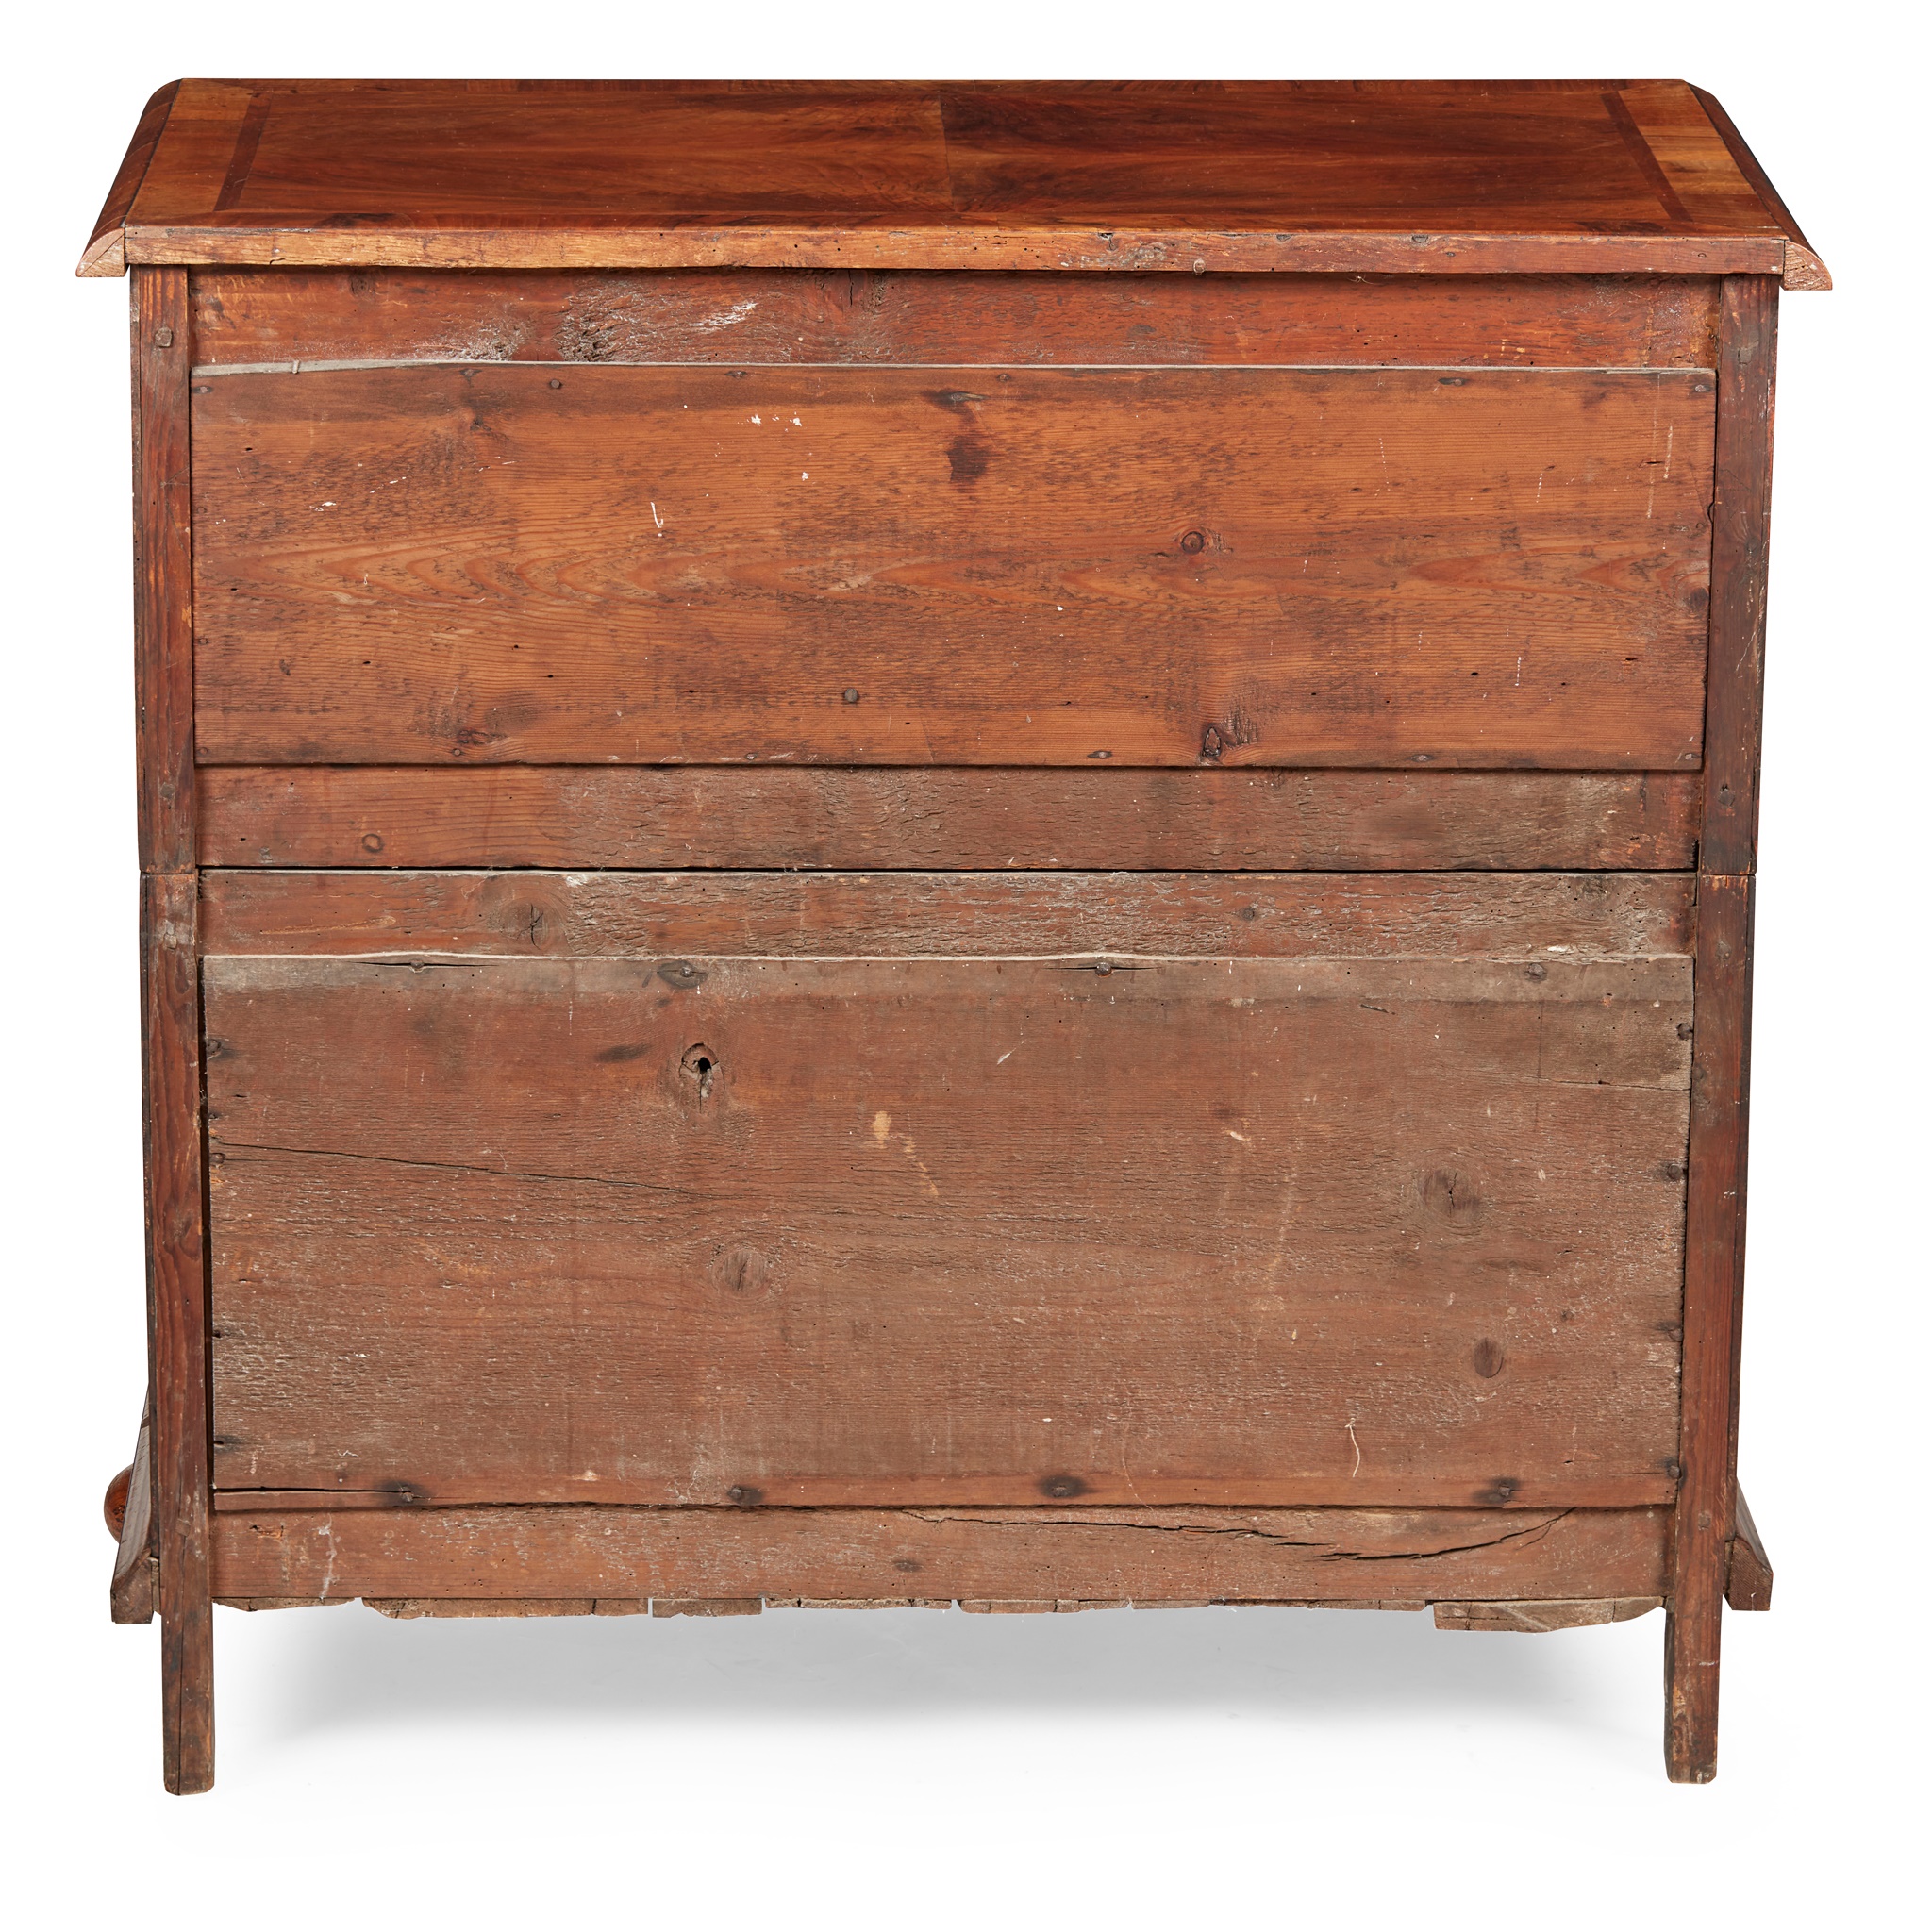 GEORGE I WALNUT CHEST OF DRAWERS, POSSIBLY CHANNEL ISLANDS EARLY 18TH CENTURY - Image 2 of 2